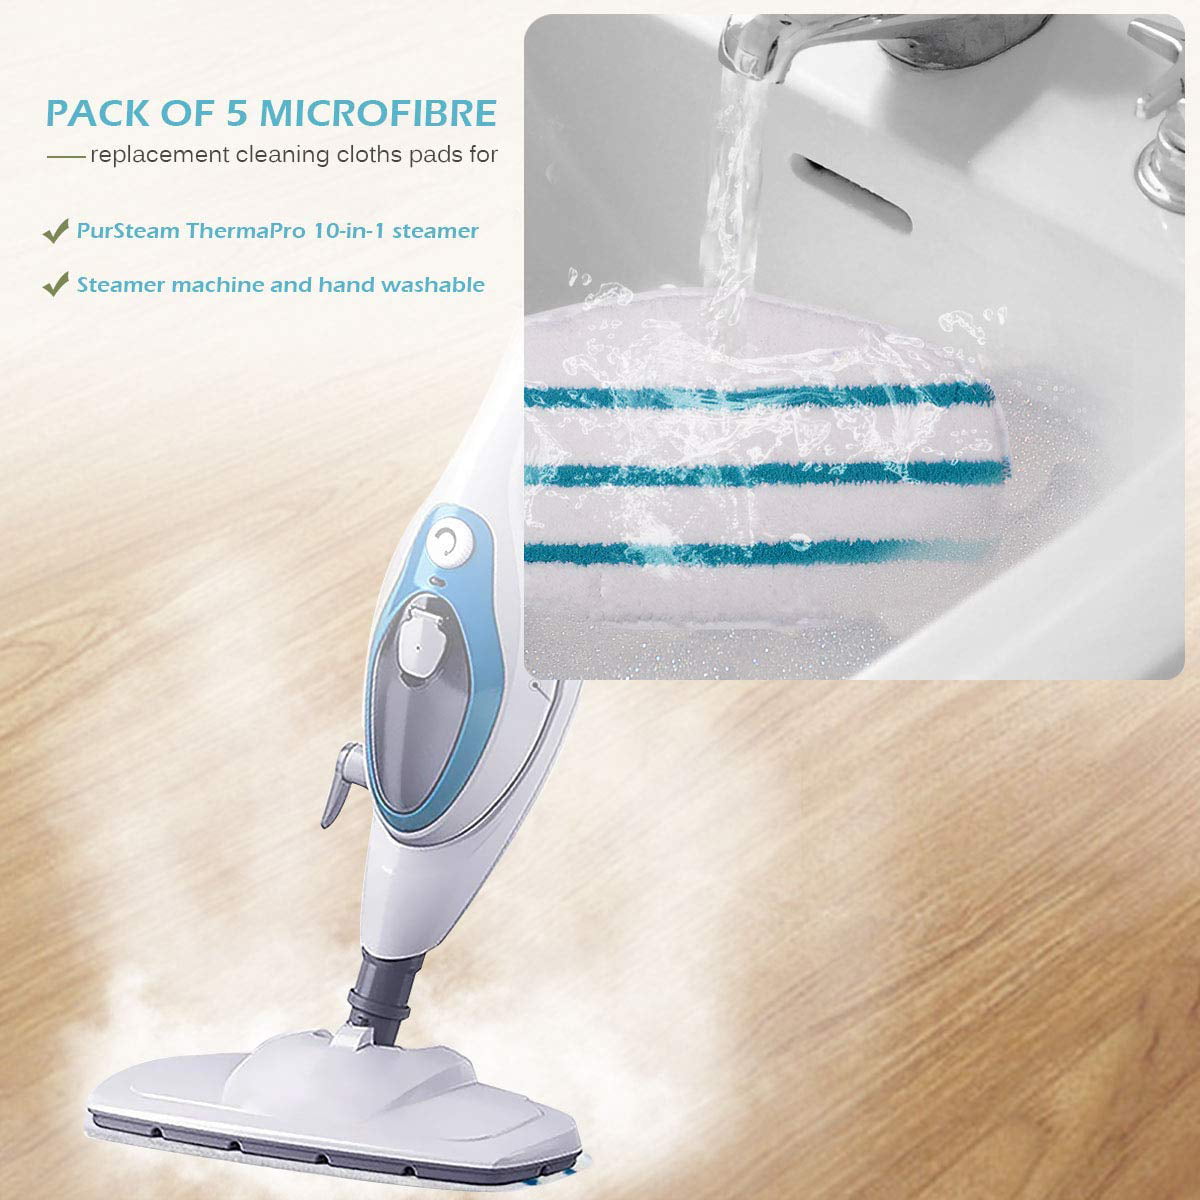 8pcs Fushing 8Pcs Steam Mop Pads Washable Microfiber Cleaning Steamer Replacement Pads for PurSteam ThermaPro 10-in-1 Steam Mop Cleaner 